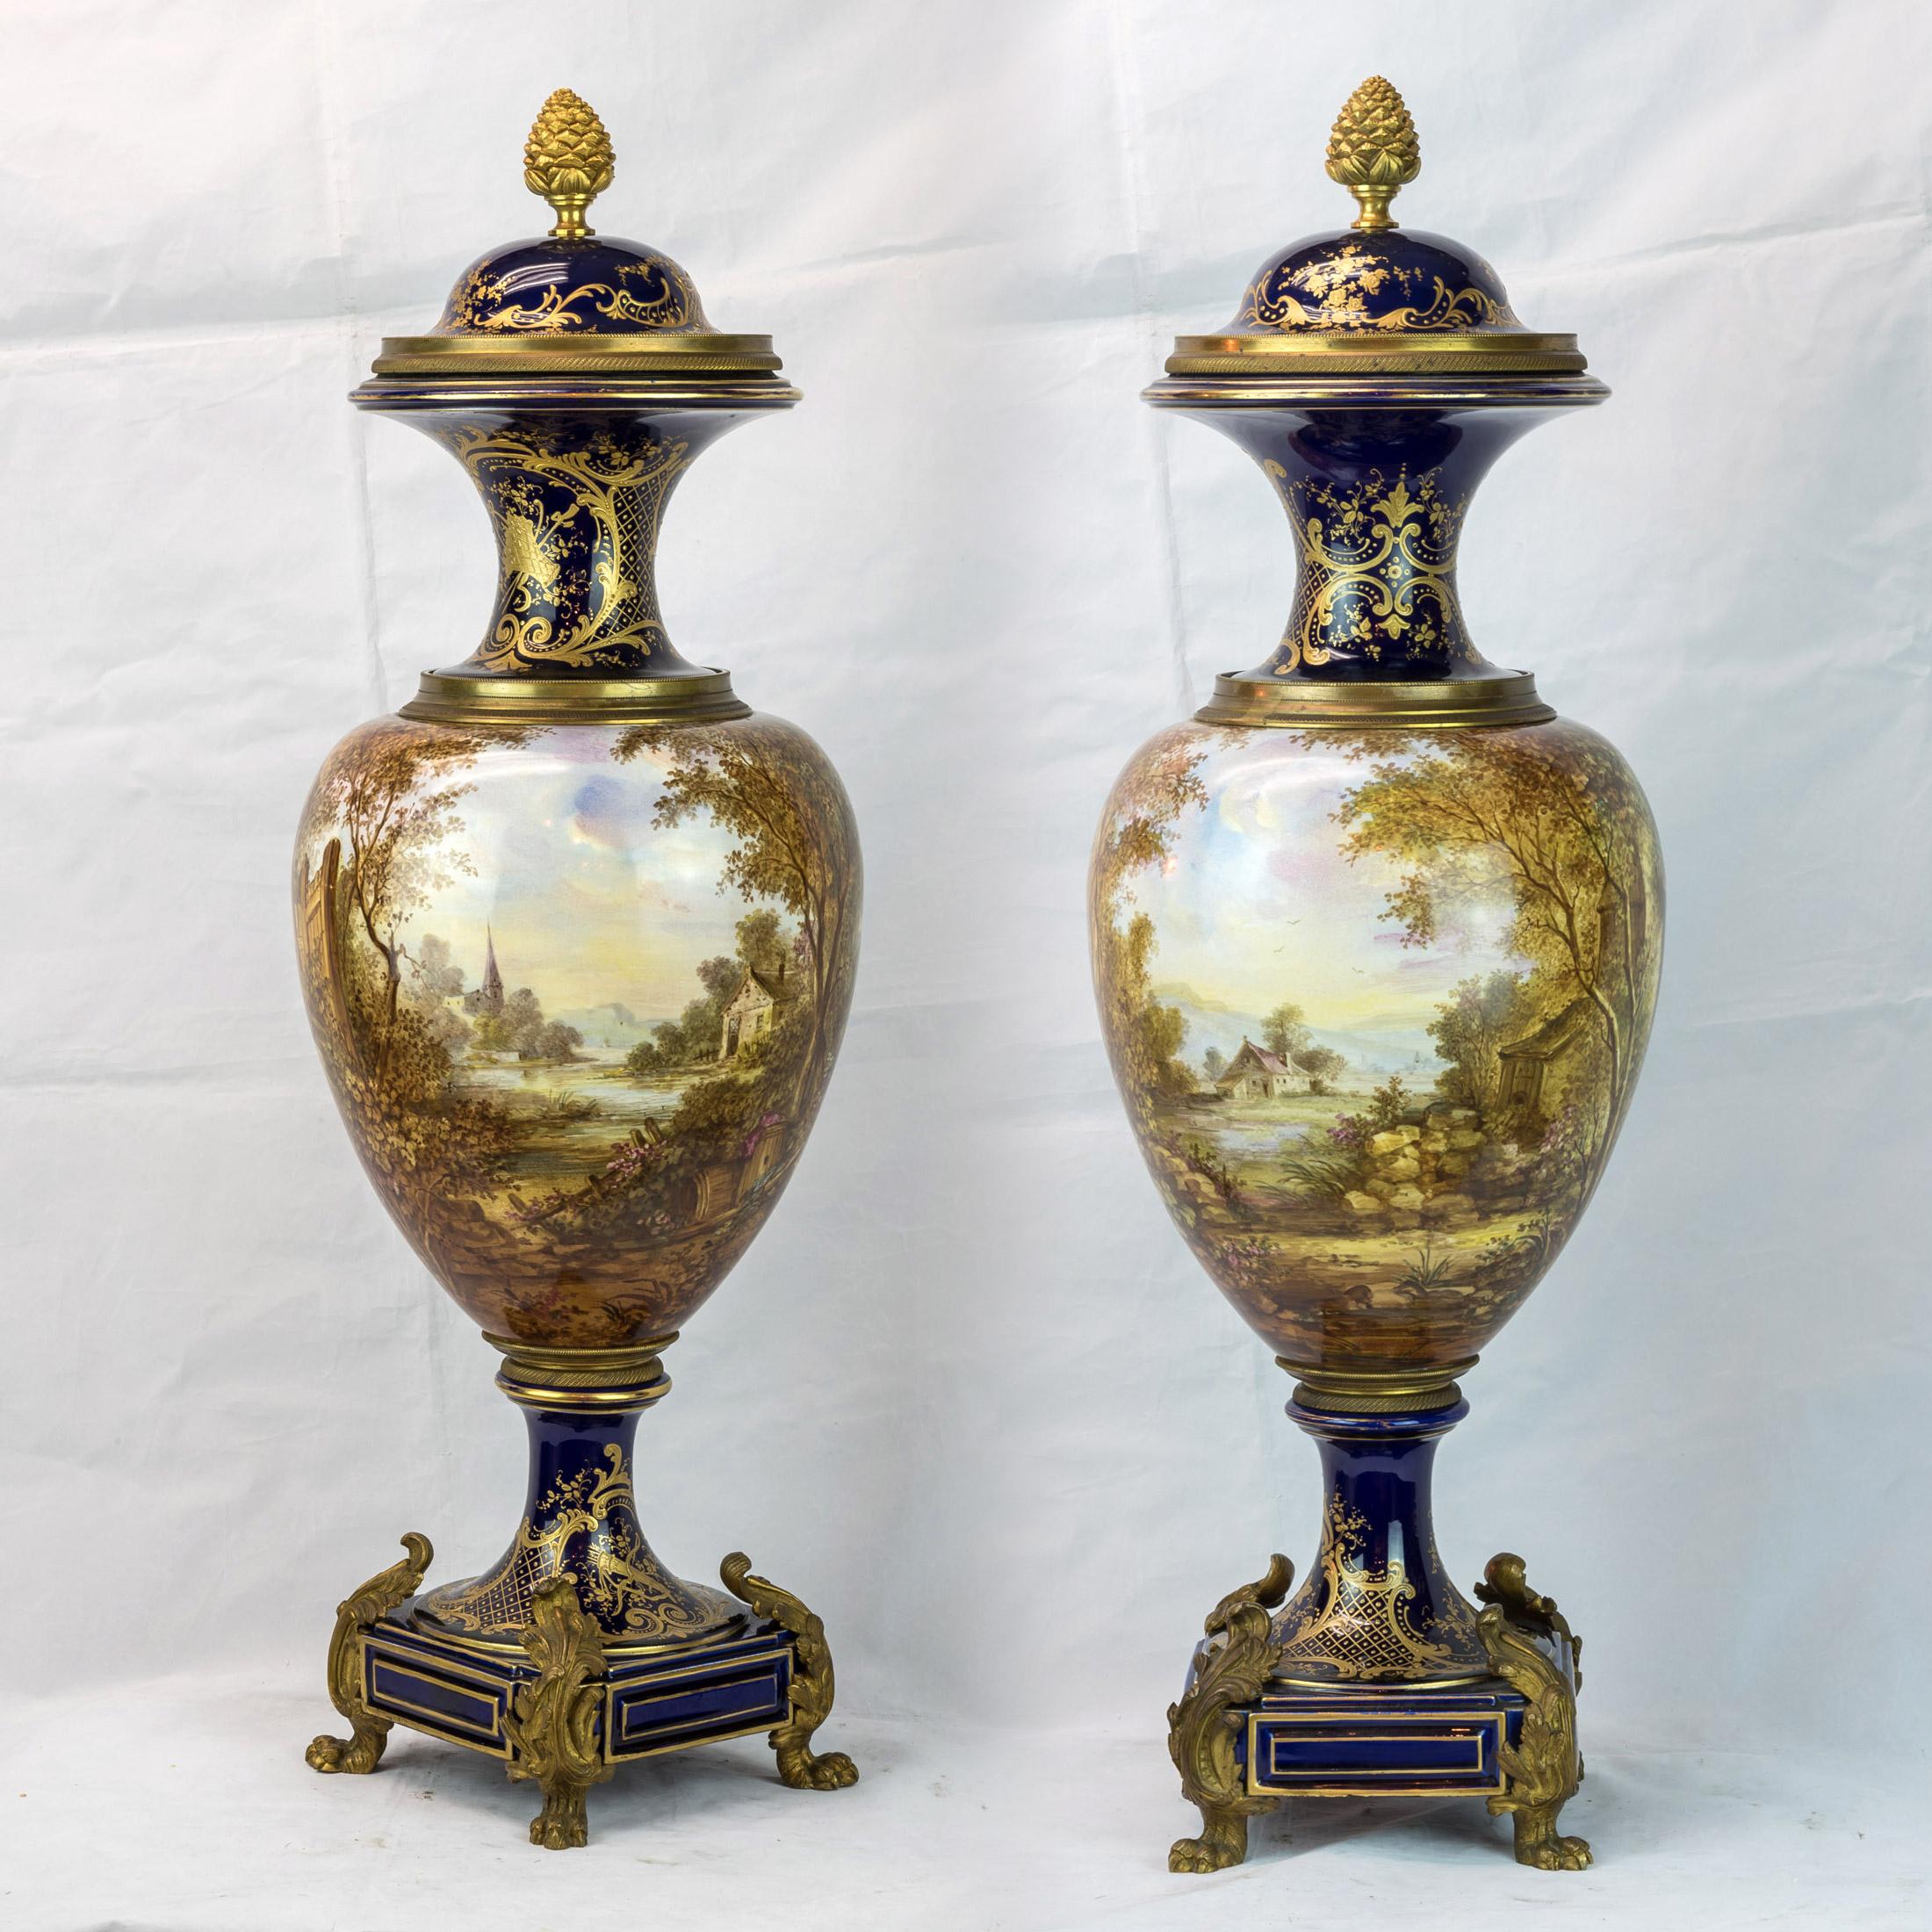 A very Fine pair of Sèvres style ormolu-mounted gilt bronze cobalt blue porcelain bases.
Each with waisted neck decorated with gilt on cobalt blue and above a tapering ovoid body painted in the round with a continuous scene of a prince on